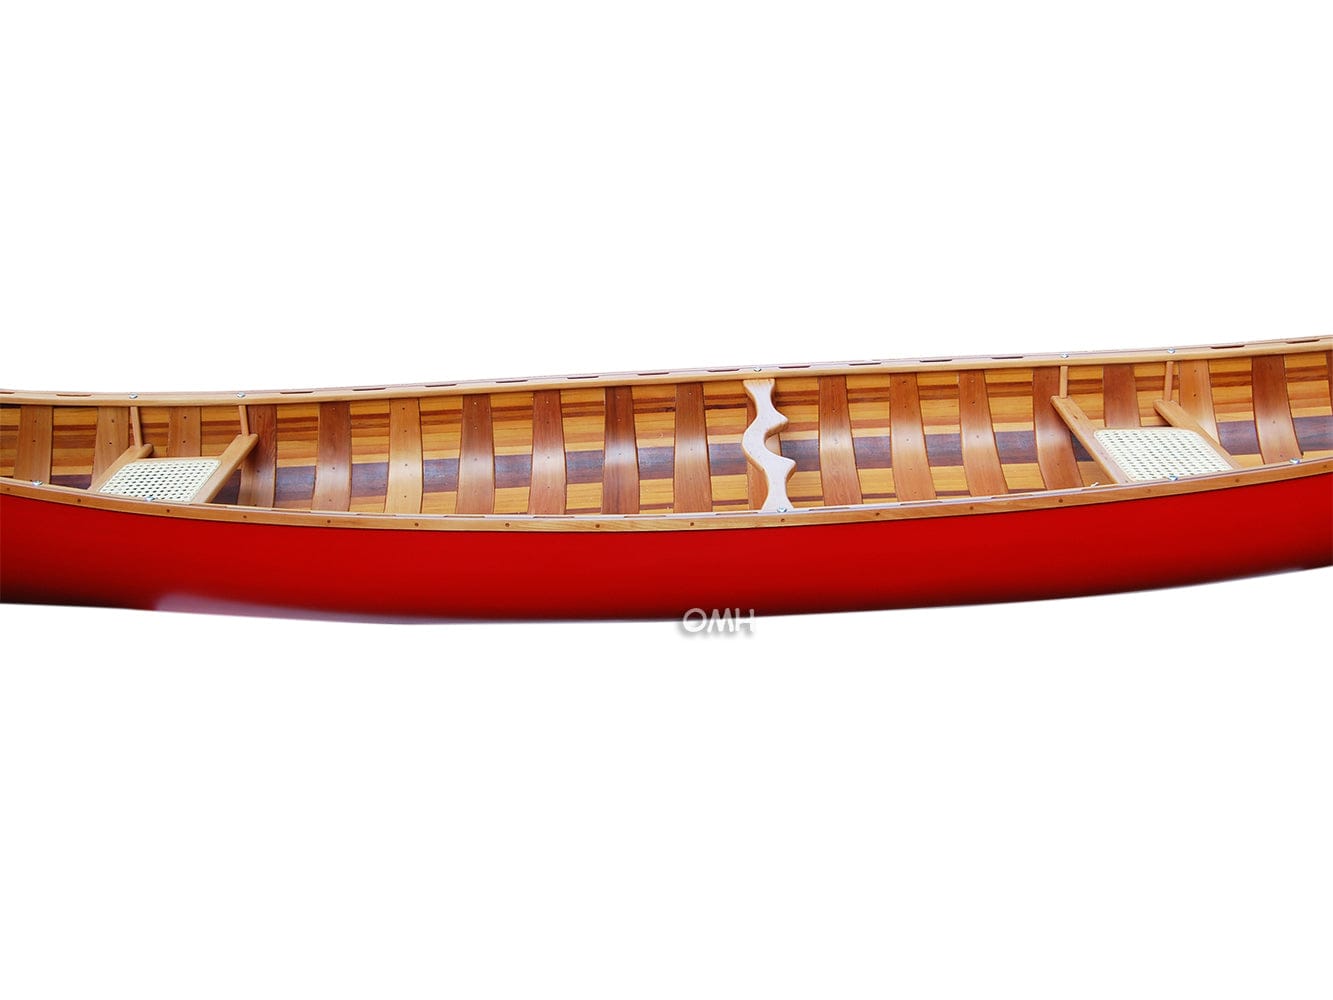 ALDO Kayaking, Canoeing & Rafting>Canoes L: 187.5 W: 31.5 H: 24 Inches / NEW / wood Real High Quality  Red Wood Cedar Canoe 16 Ft With Ribs